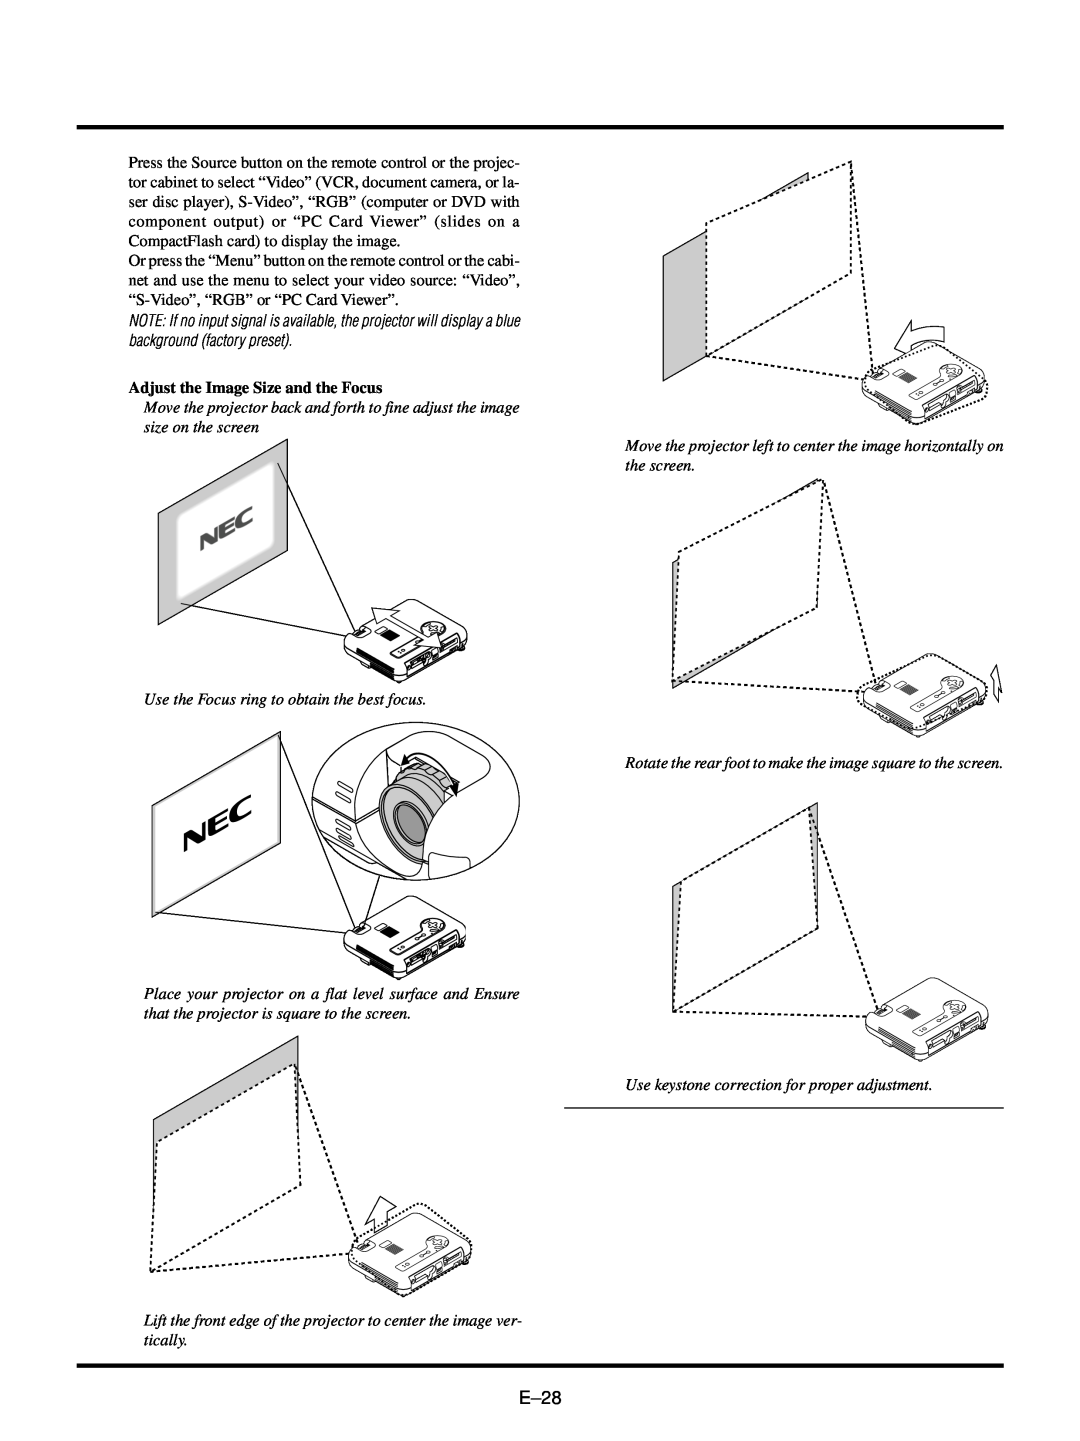 NEC LT150/LT85 user manual E–28, Adjust the Image Size and the Focus 